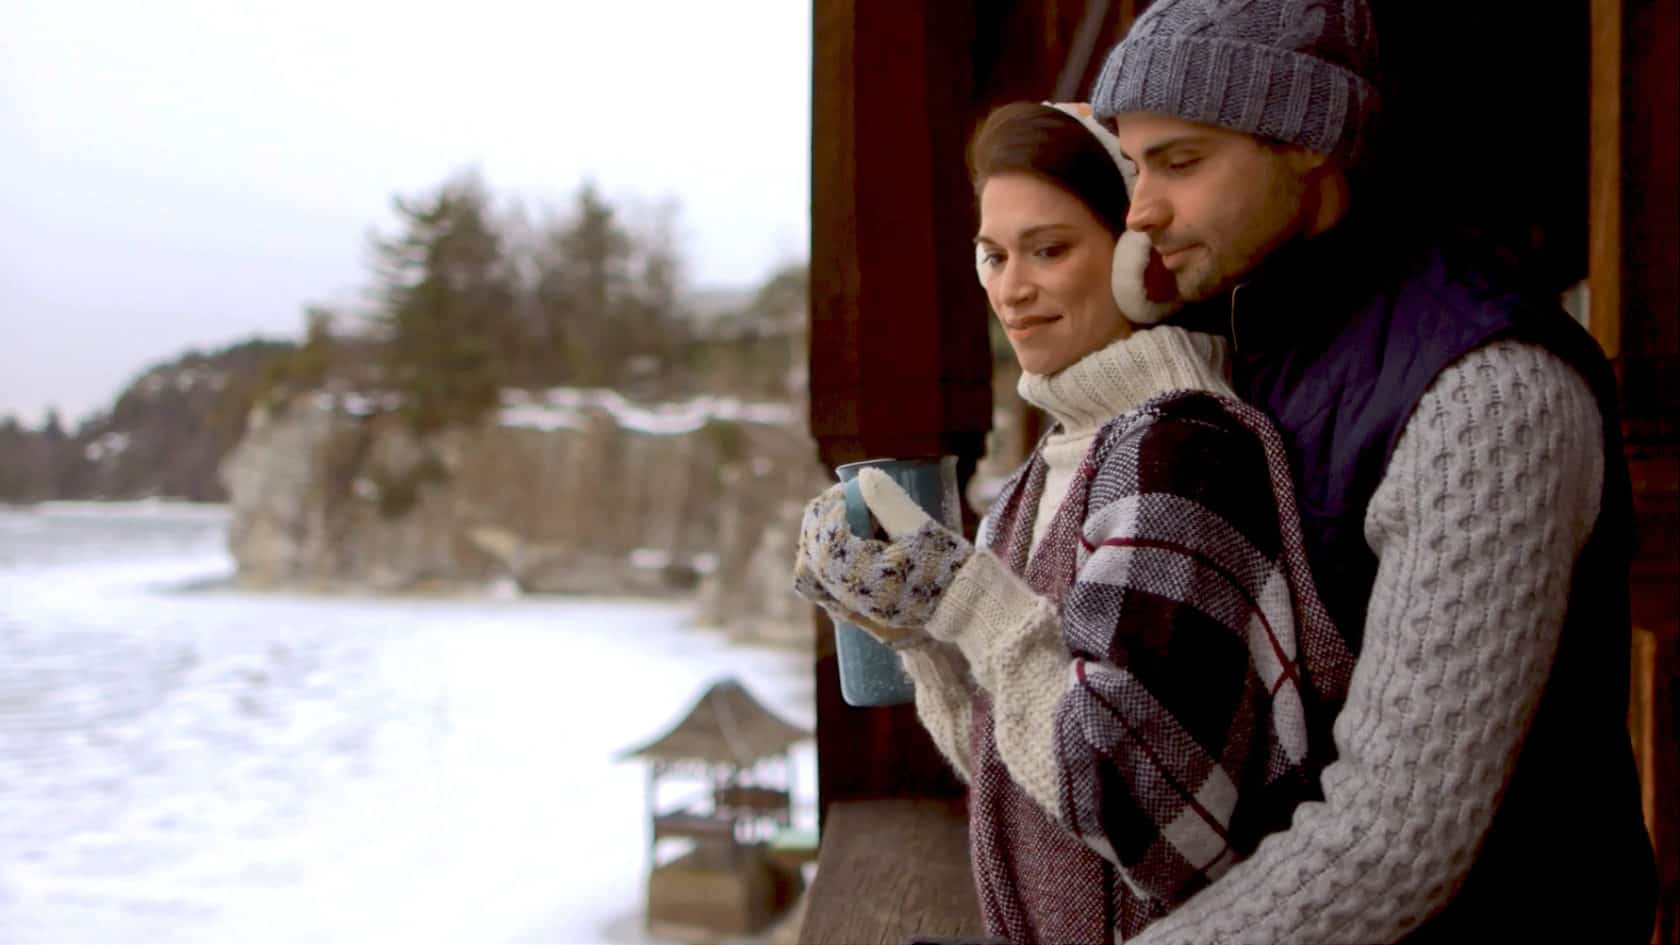 Couple wearing warm winter clothing. They are standing on a balcony overlooking a lake drinking